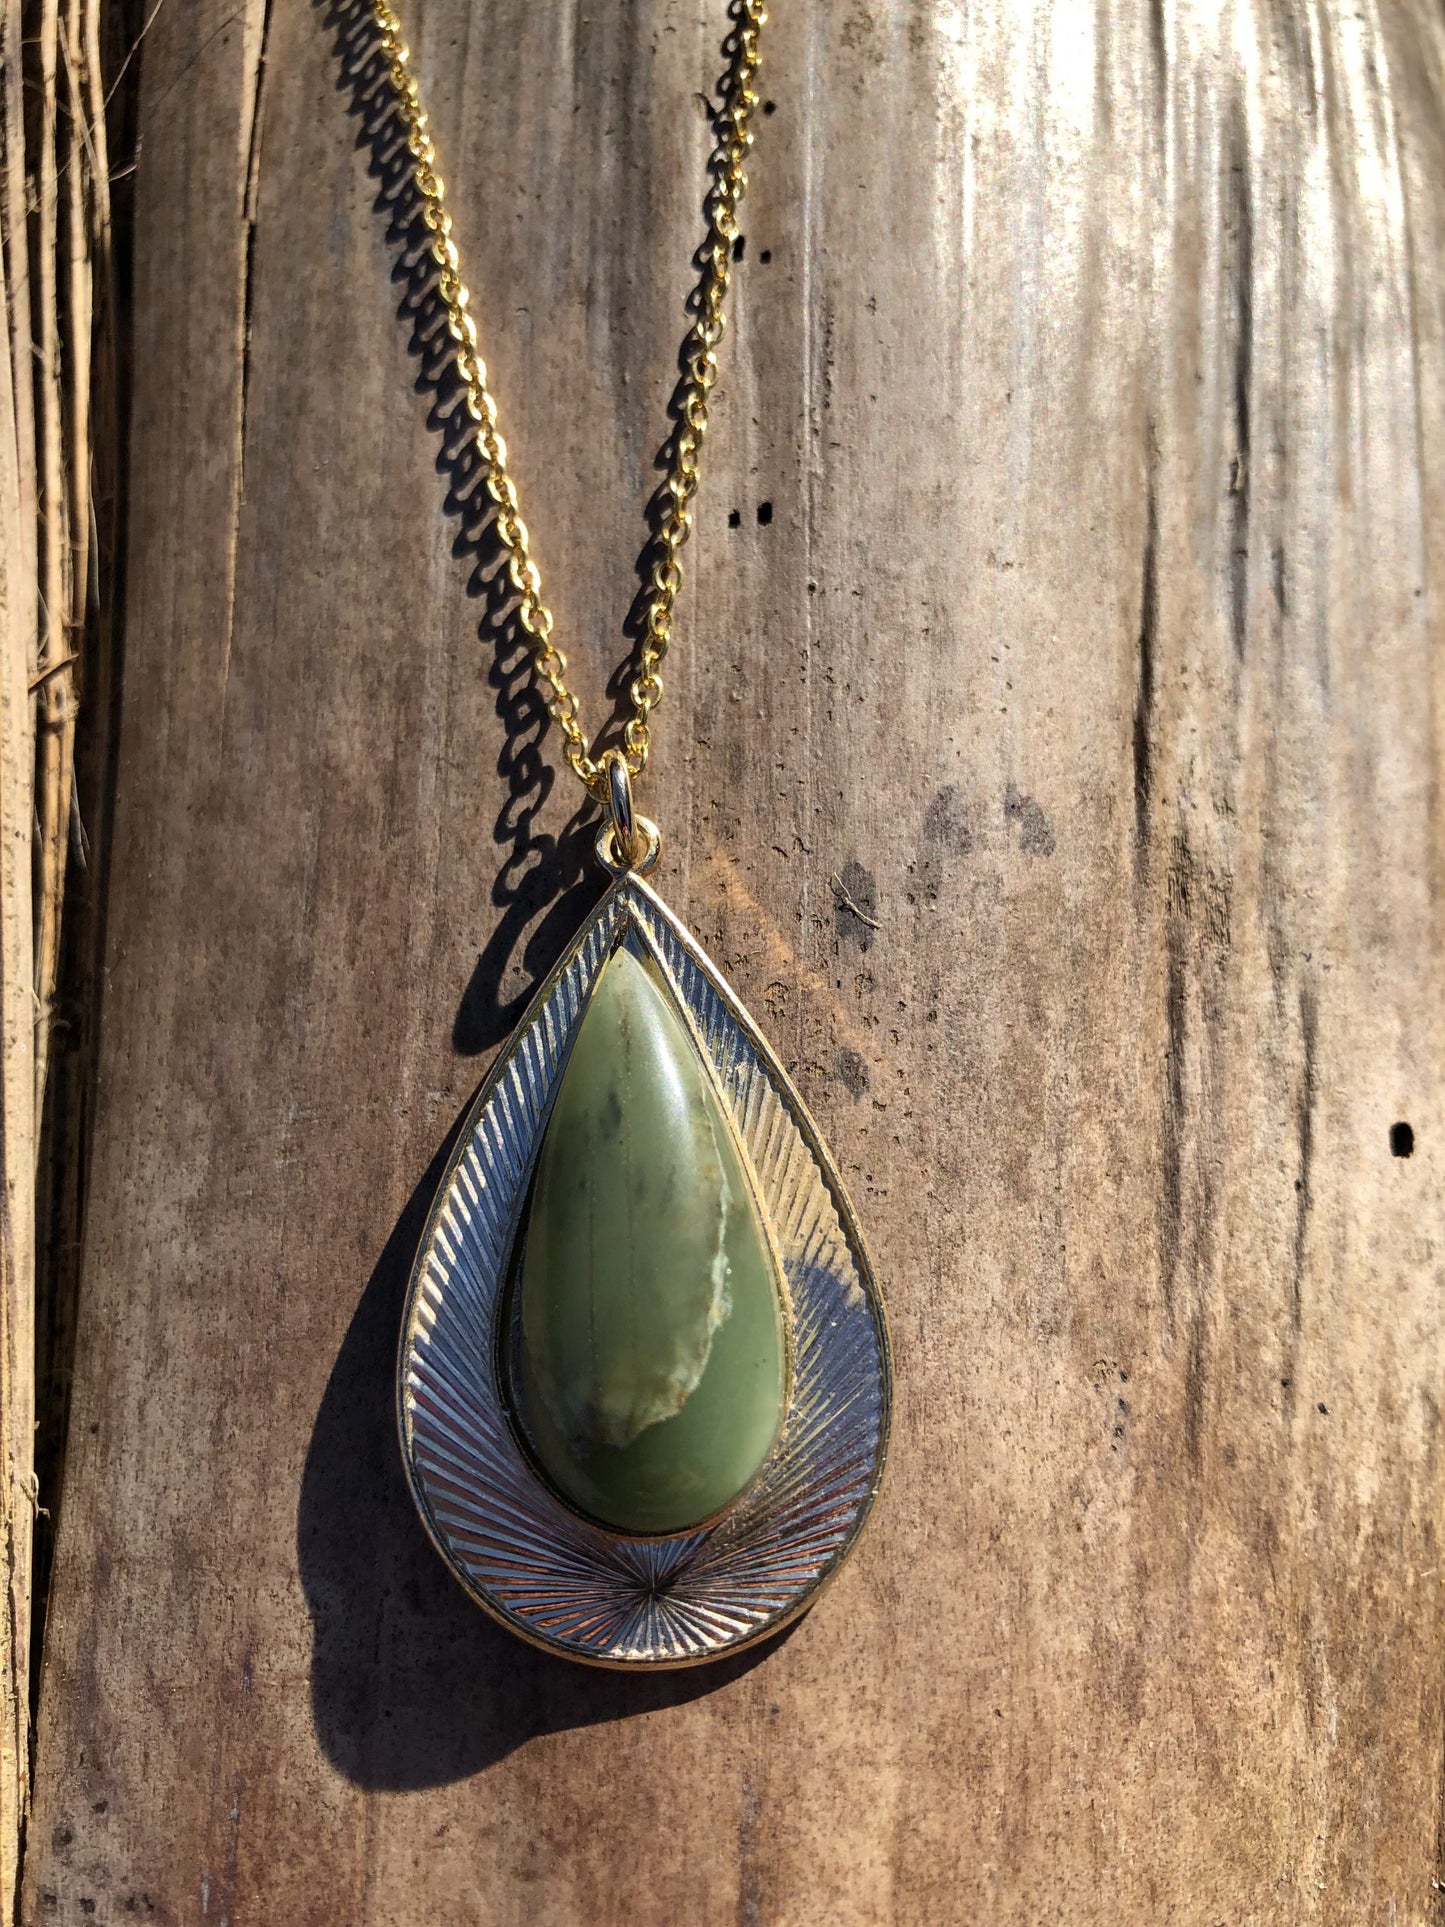 Necklace with natural Botswana Jade (green aventurine) stone, hand polished to a 32x12mm teardrop cabochon and set in a gold plated setting with 19 inch chain, on wood